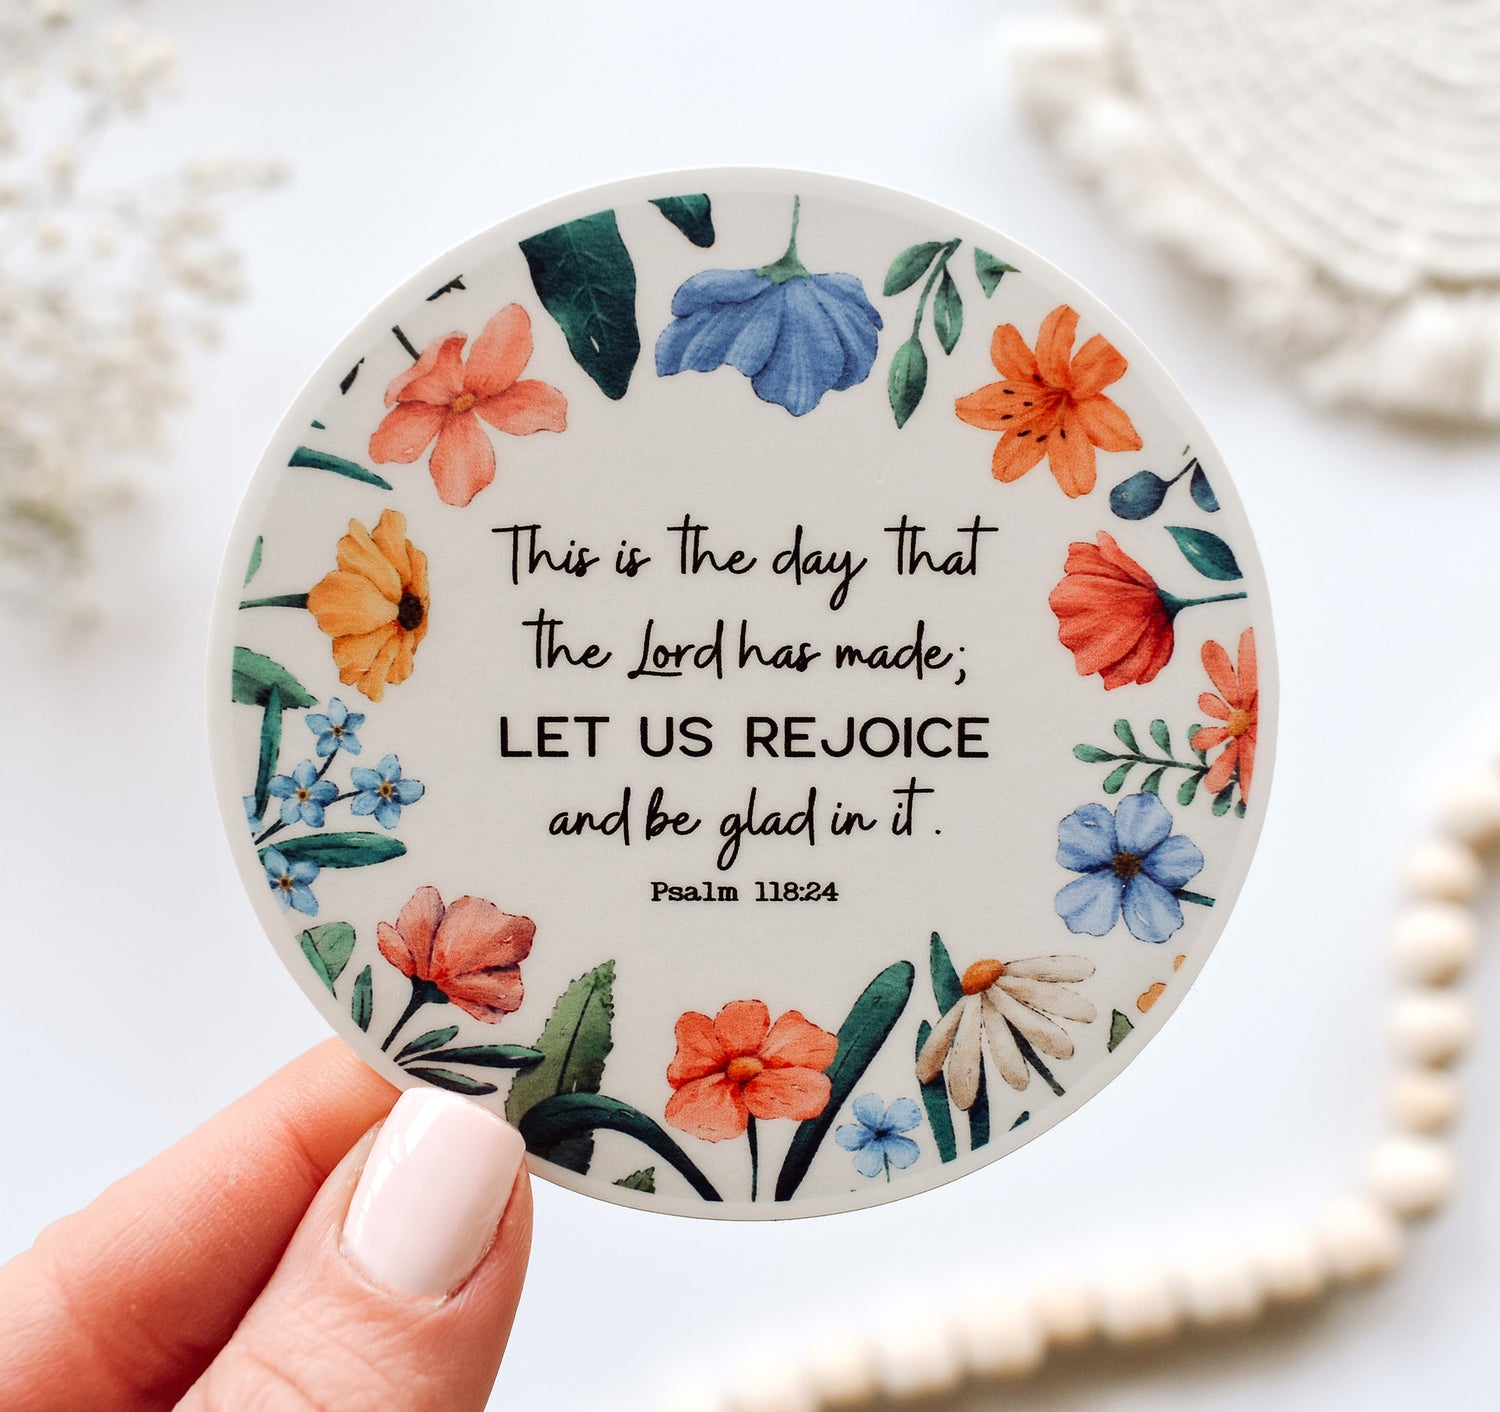 This is the day that the Lord has made; let us rejoice and be glad in it, Psalm 118:24 Bible verse sticker with beautiful flowers